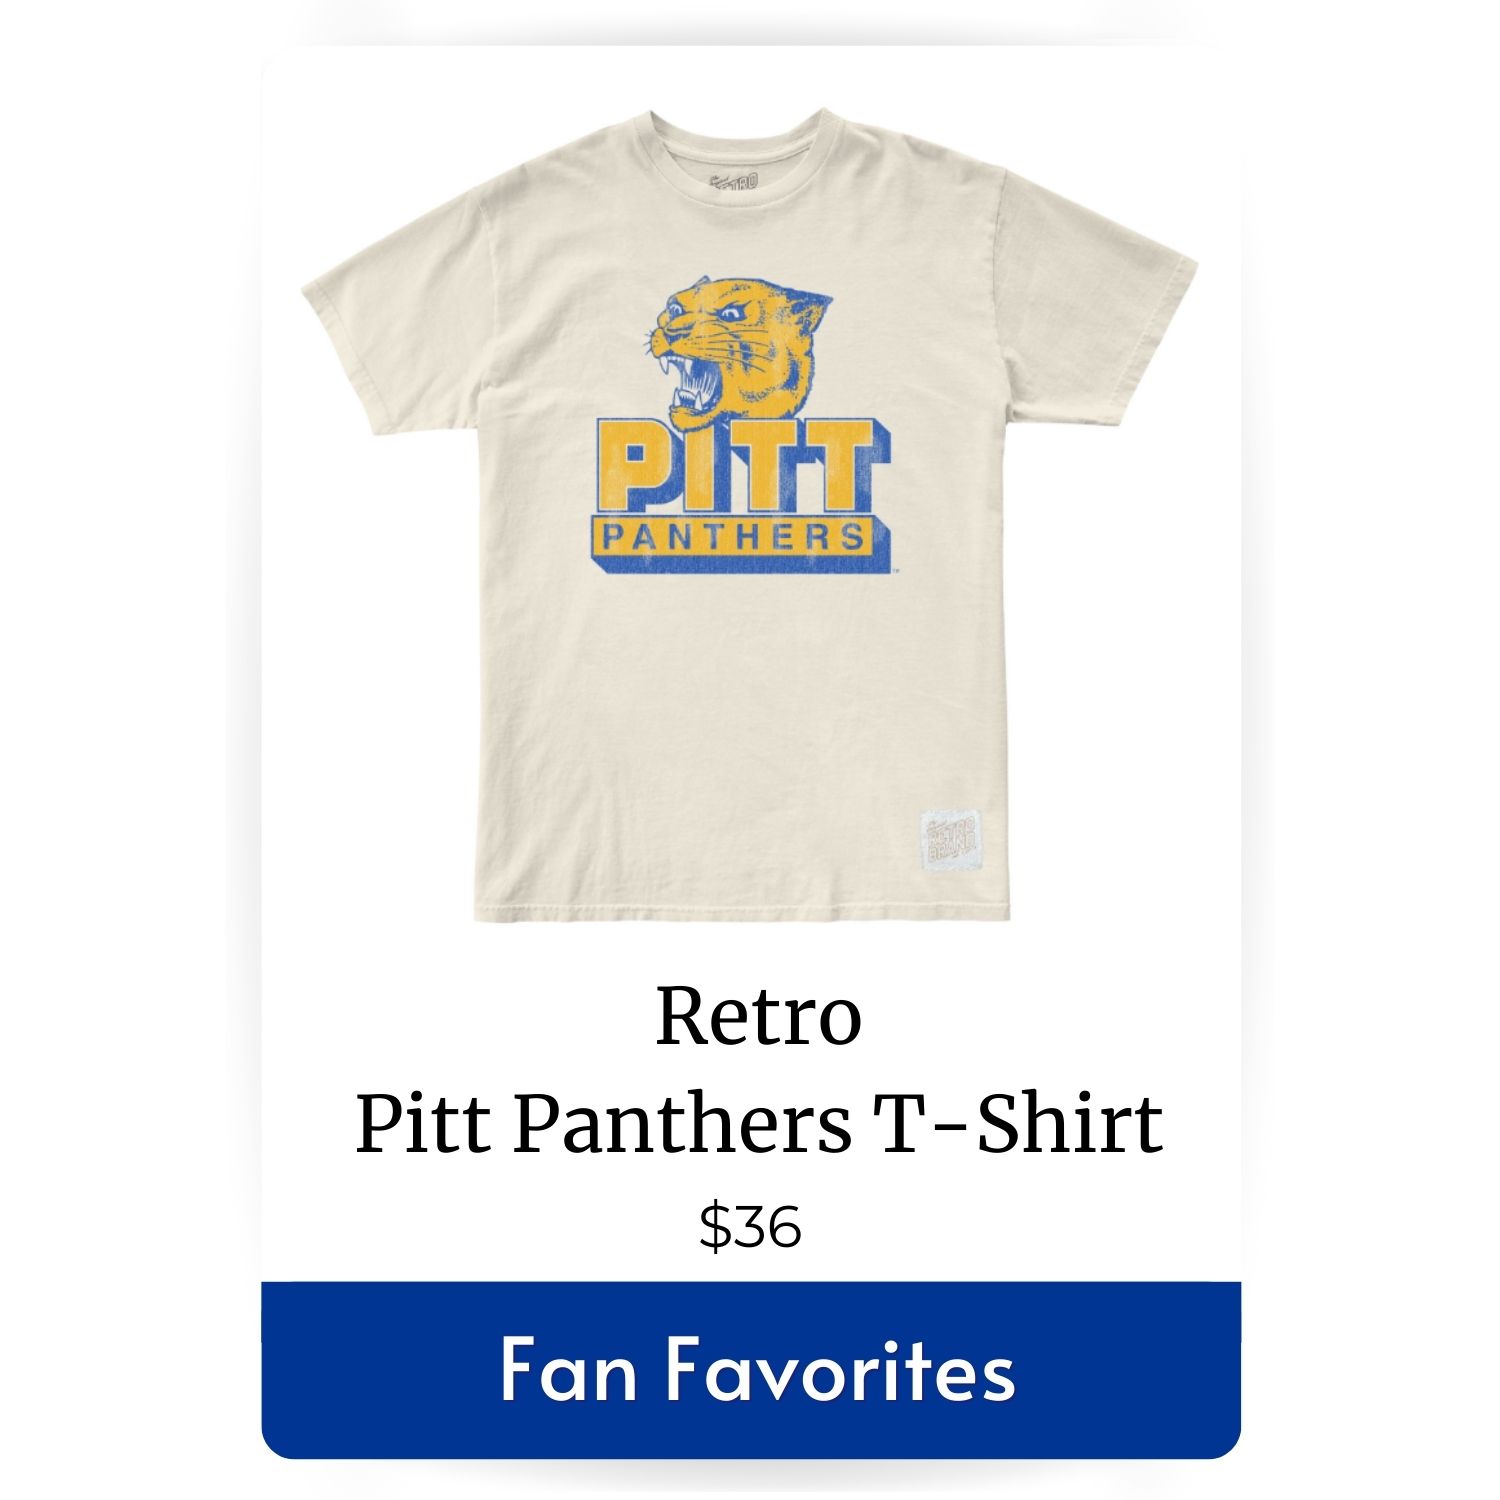 featured product fan favorite Retro Pitt Panthers T-Shirt 36 dollars